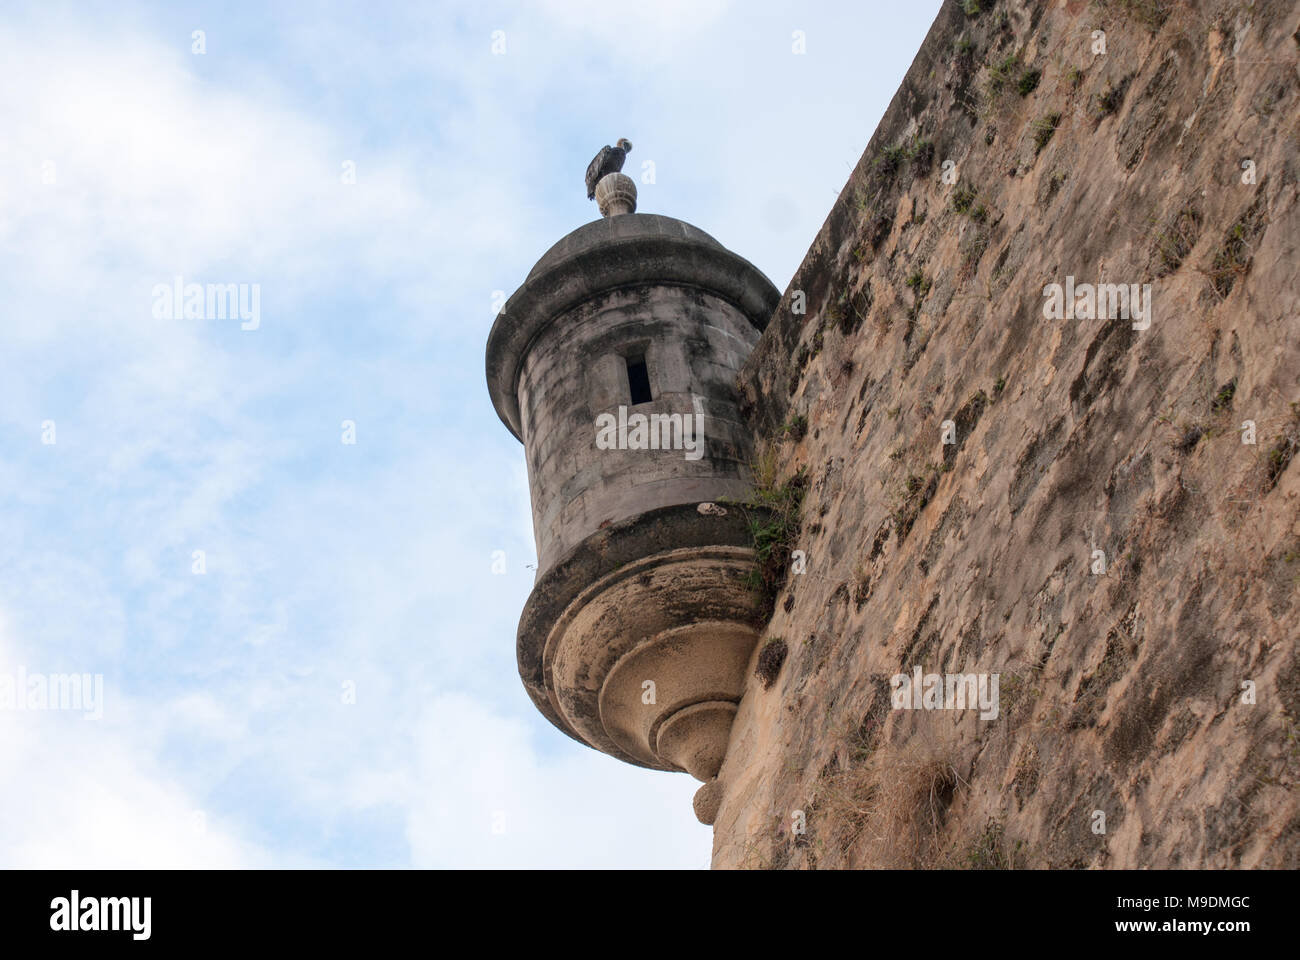 Lower view of a sentry box (garita) with a pelican atop in San Juan, Puerto Rico Stock Photo